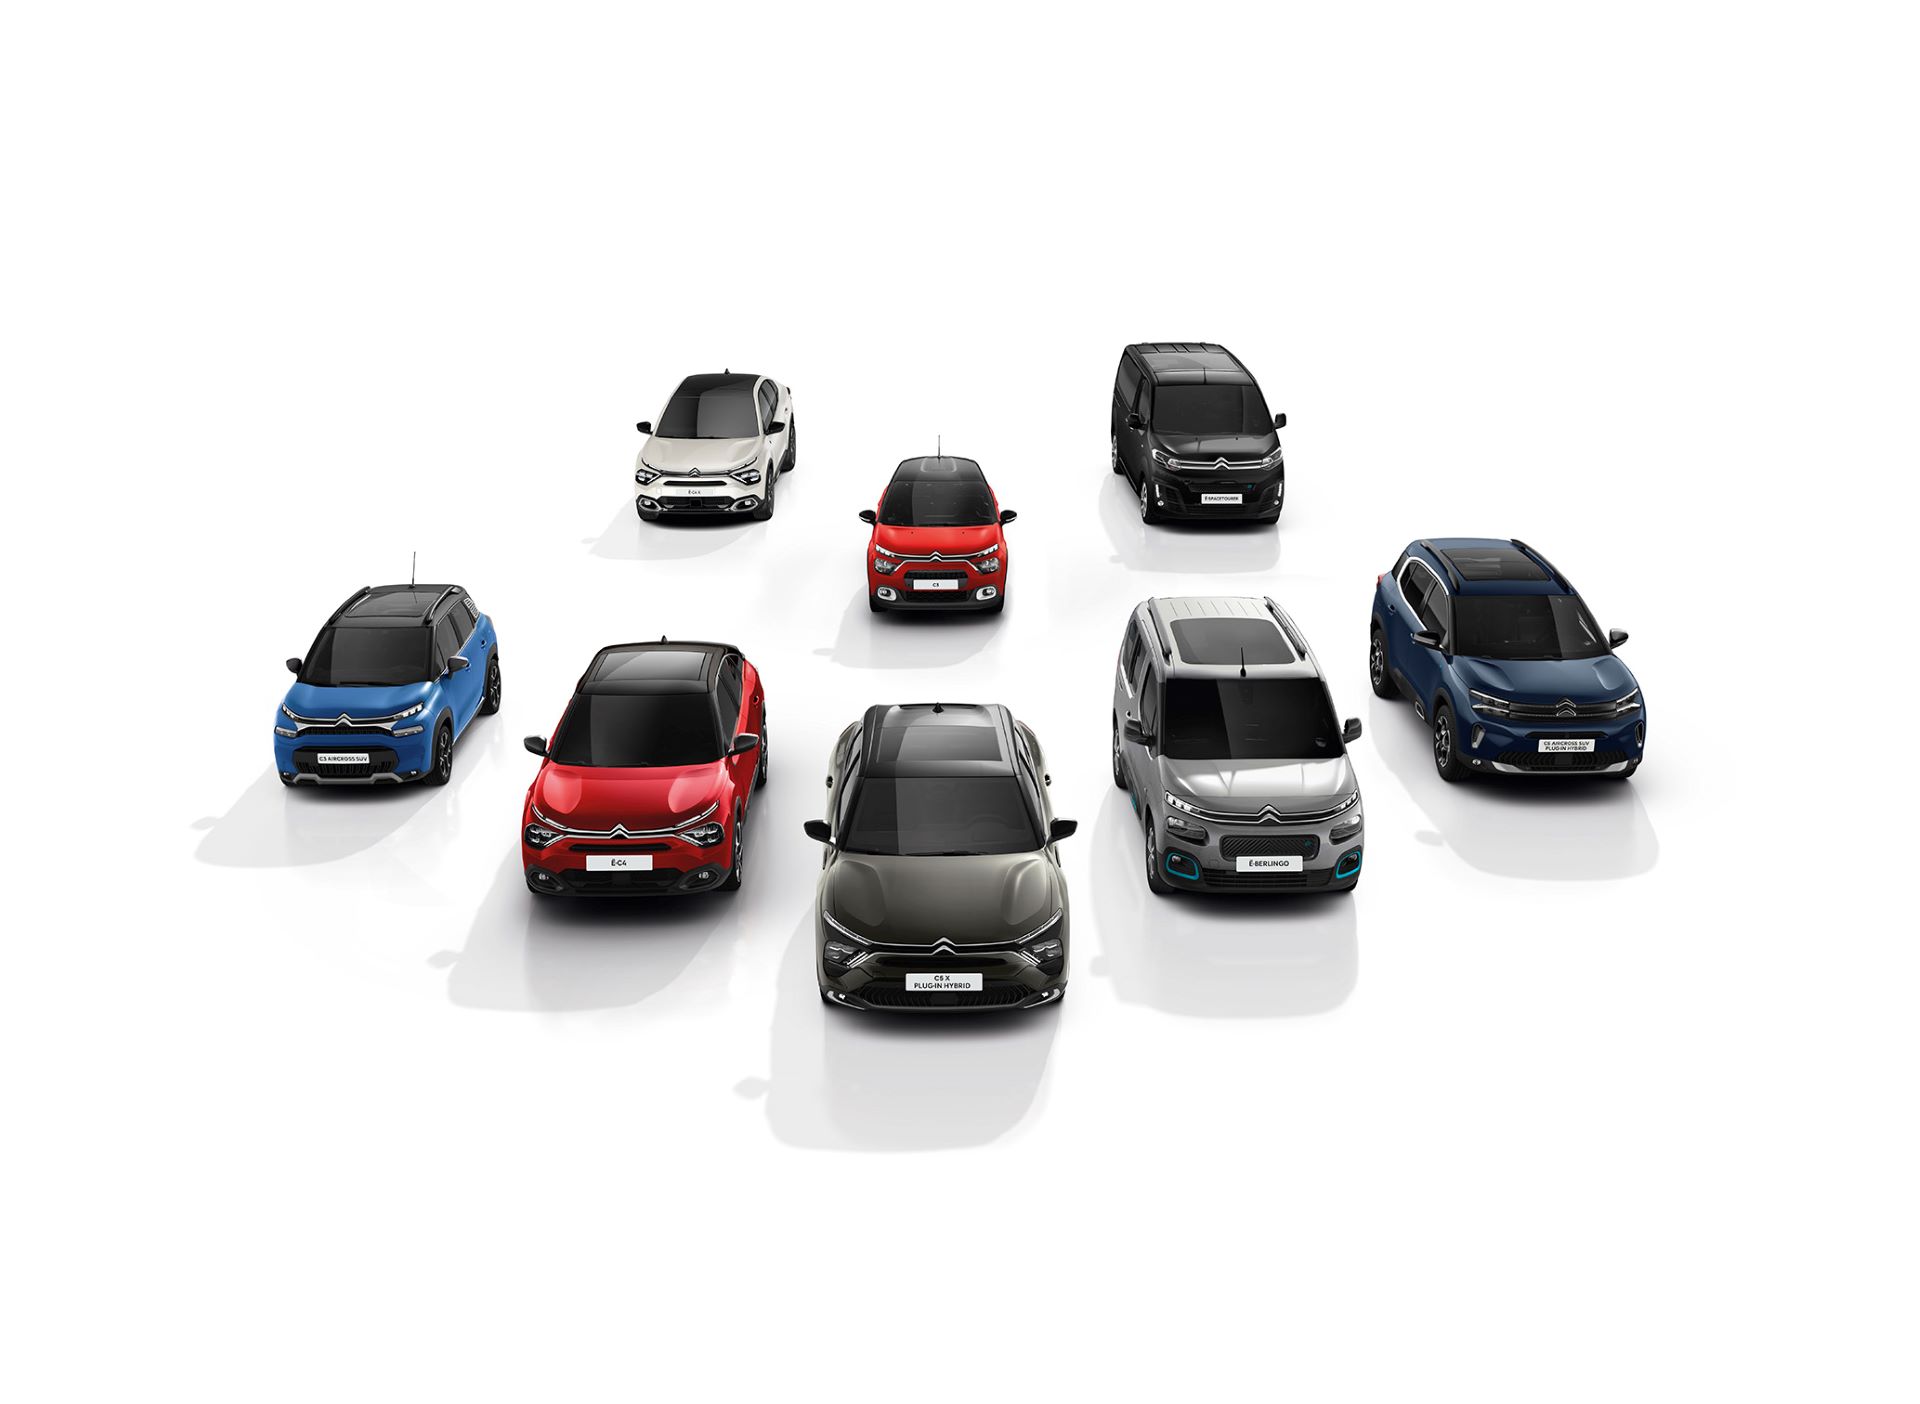 CITROËN REDEFINES ITS RANGE FOR AN EASIER PURCHASING PROCESS AND BETTER CUSTOMER EXPERIENCE